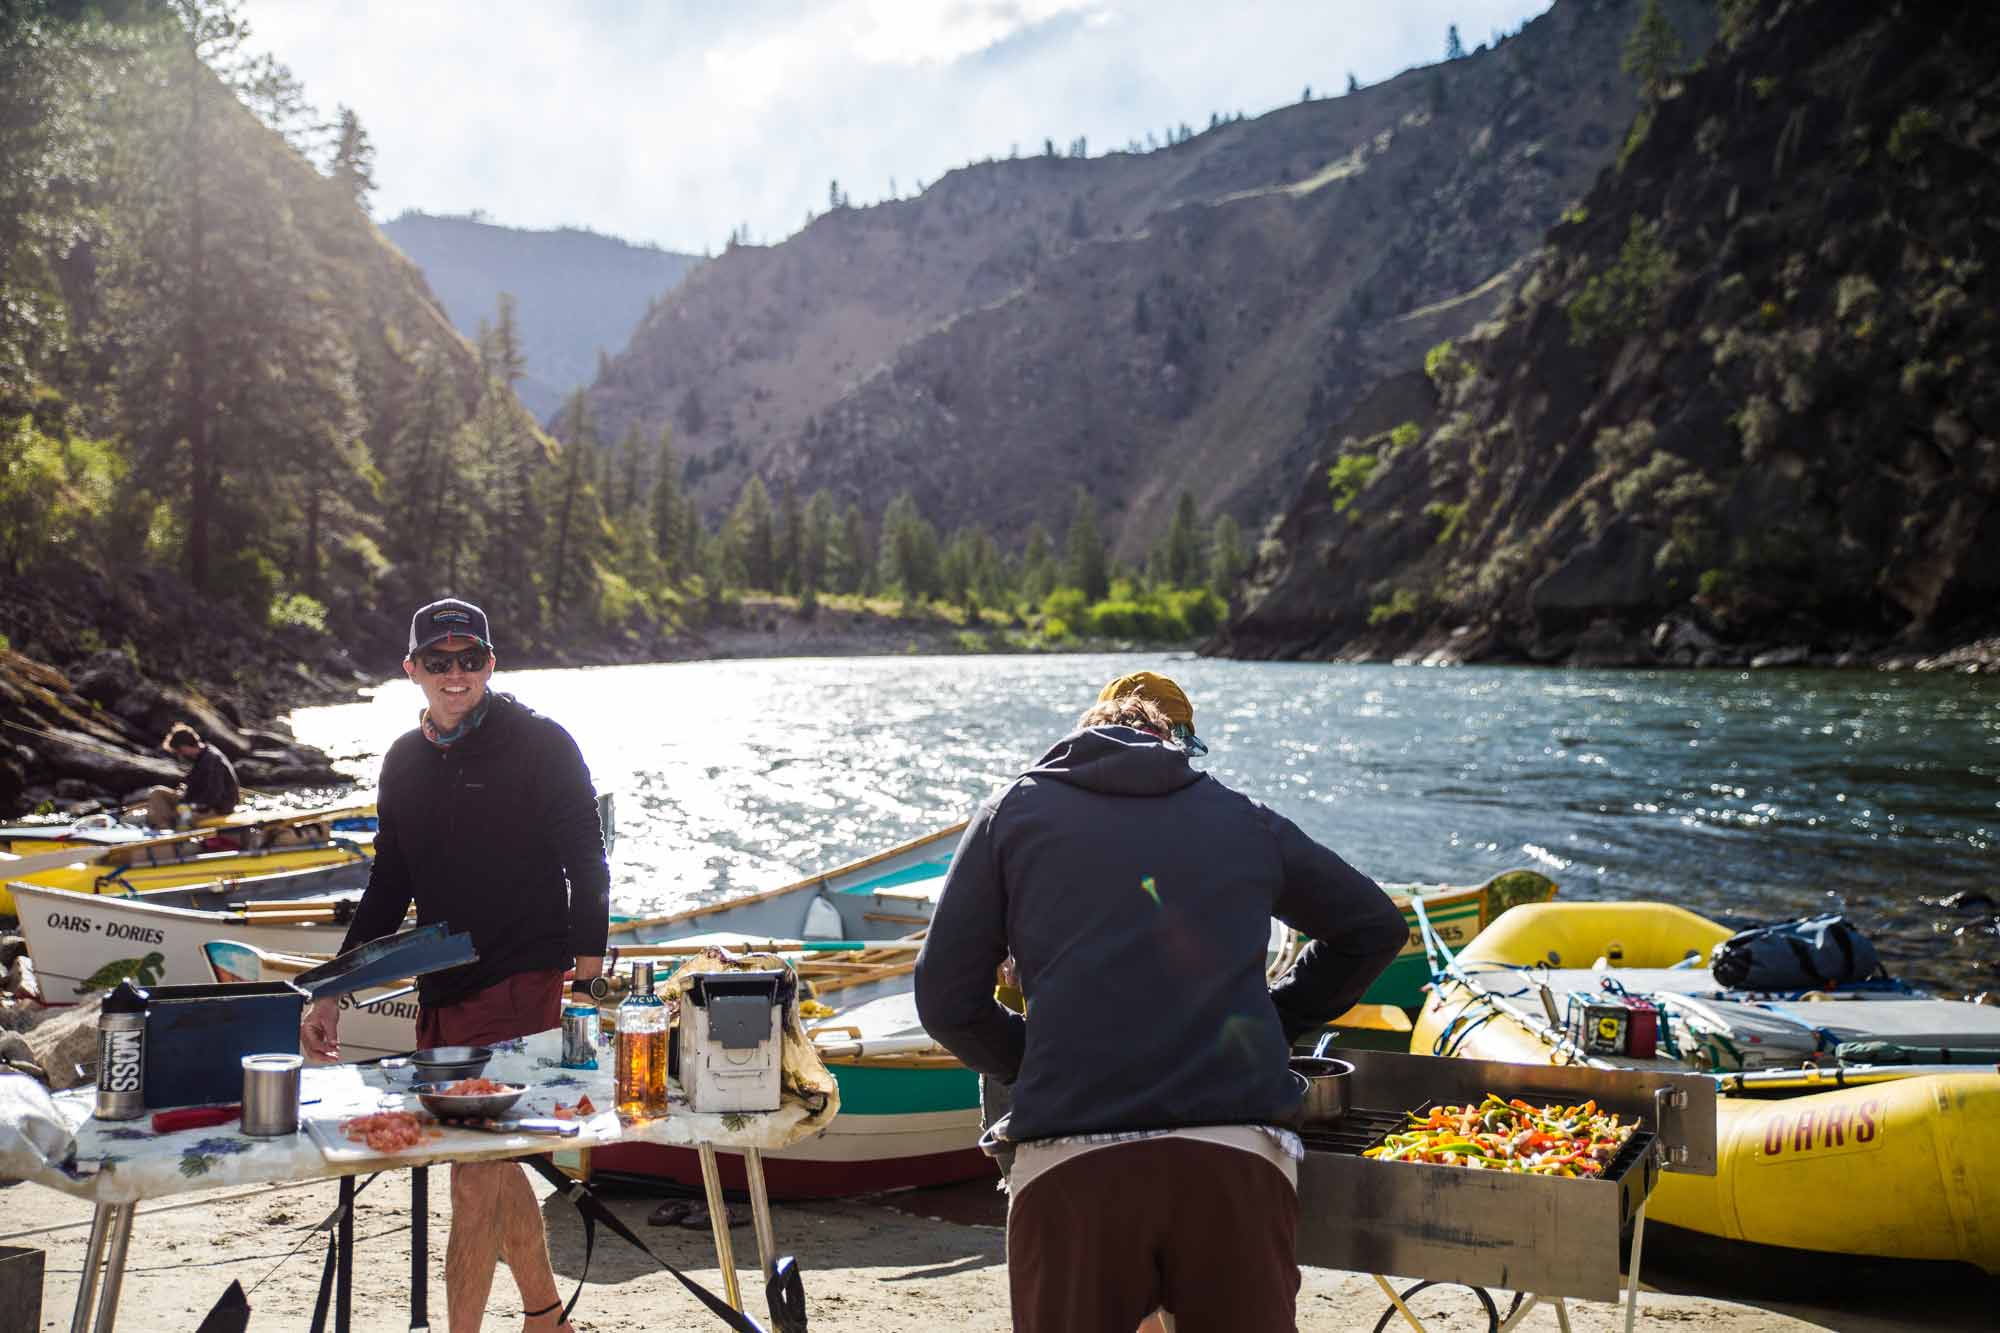 Guides preparing dinner on a multi-day river trip on the Salmon River in Idaho